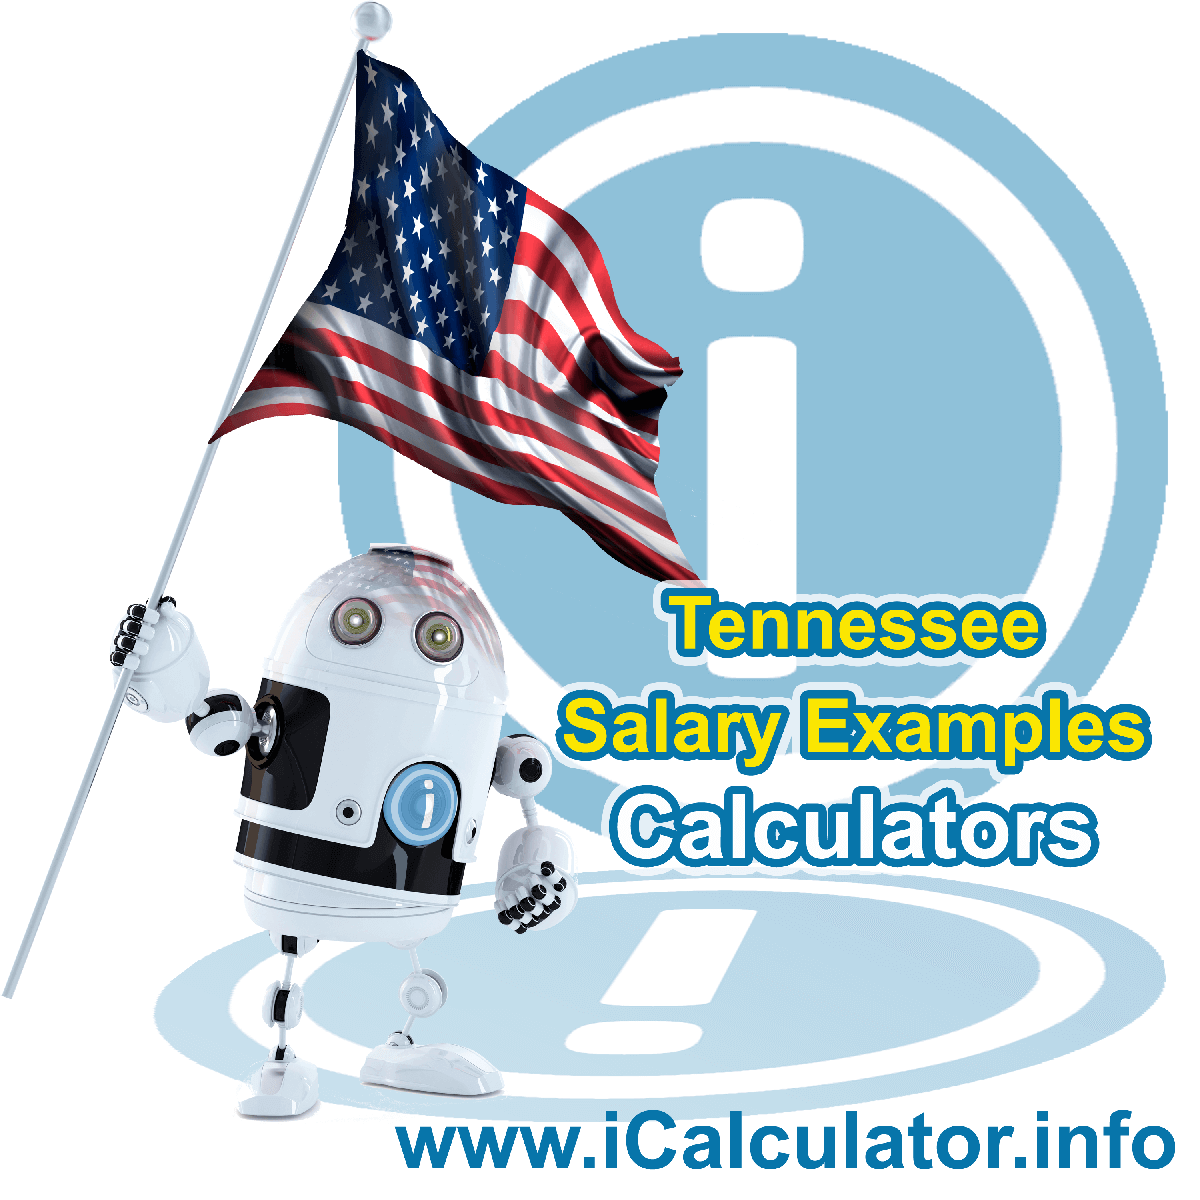 Tennessee Salary Example for $110,000.00 in 2022 | iCalculator™ | $110,000.00 salary example for employee and employer paying Tennessee State tincome taxes. Detailed salary after tax calculation including Tennessee State Tax, Federal State Tax, Medicare Deductions, Social Security, Capital Gains and other income tax and salary deductions complete with supporting Tennessee state tax tables 